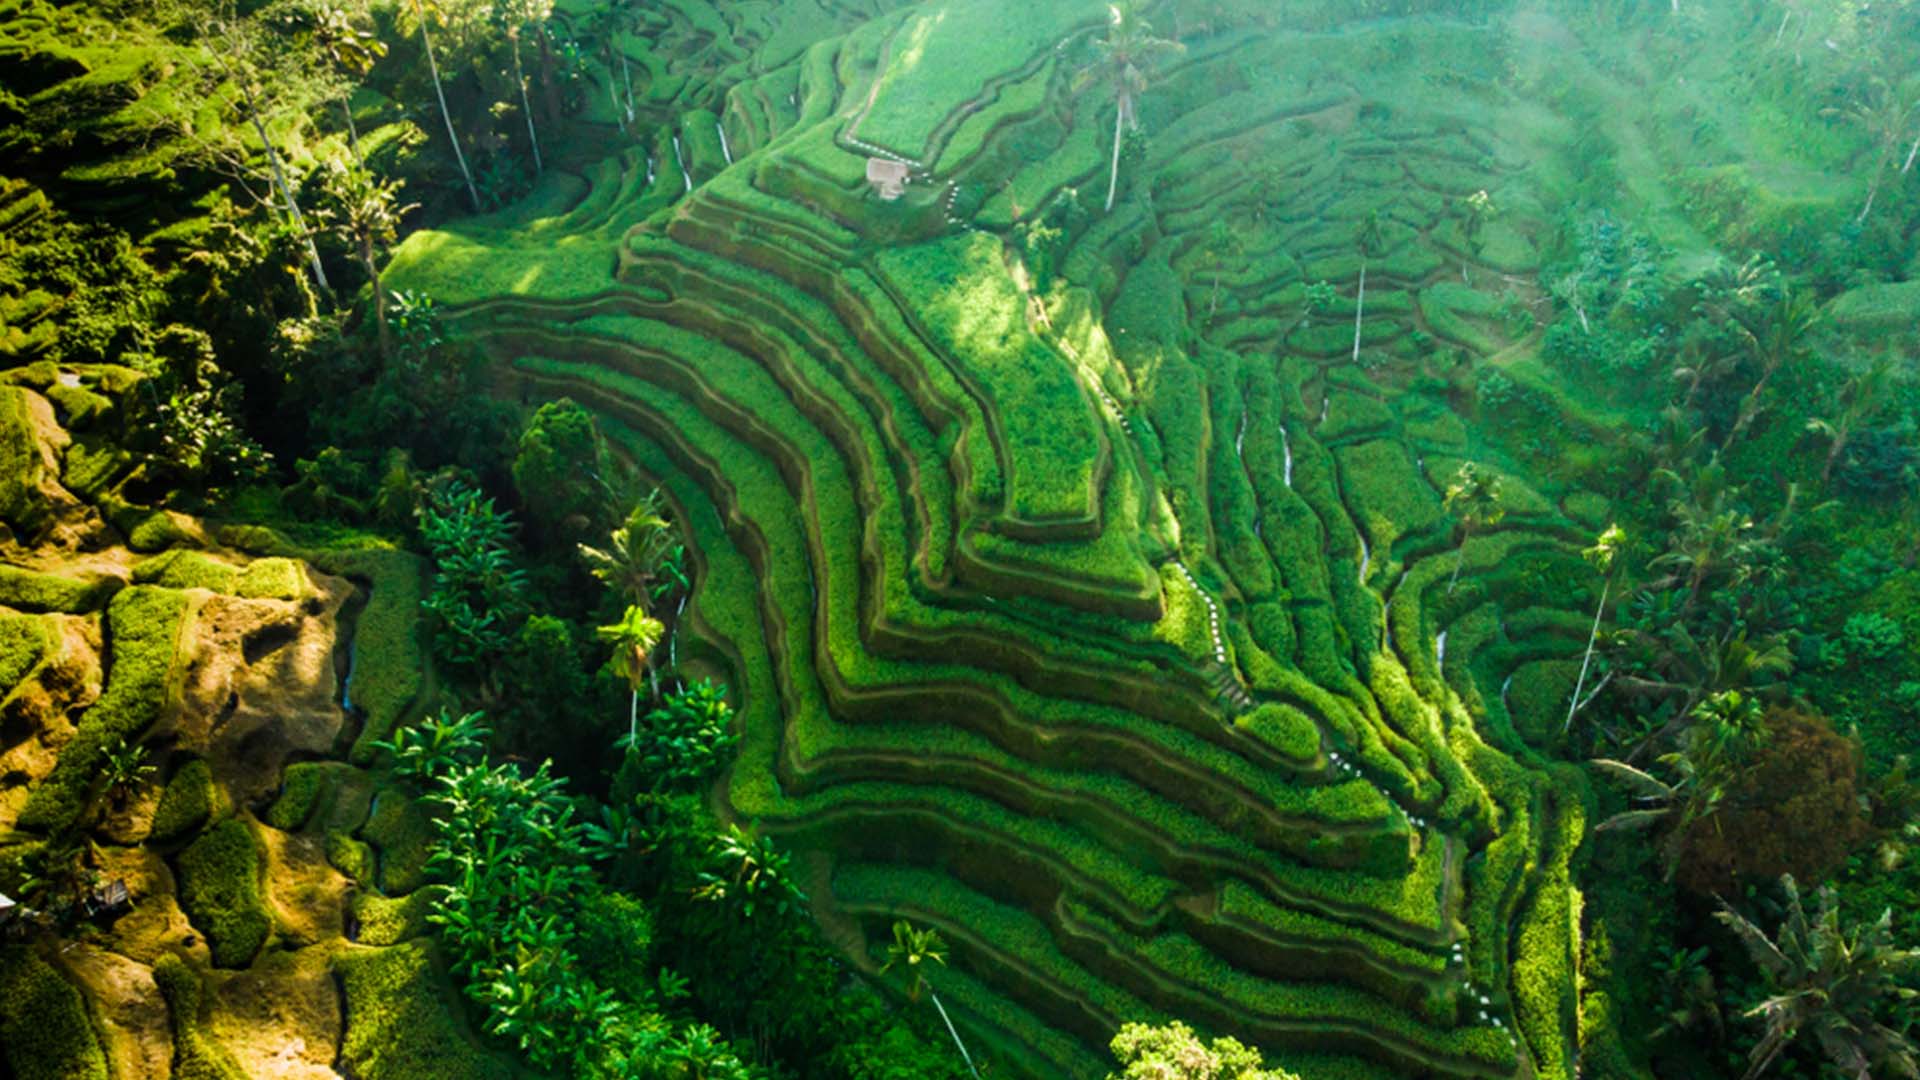 Tegallalang Rice Terrace Greenest Places Around the World